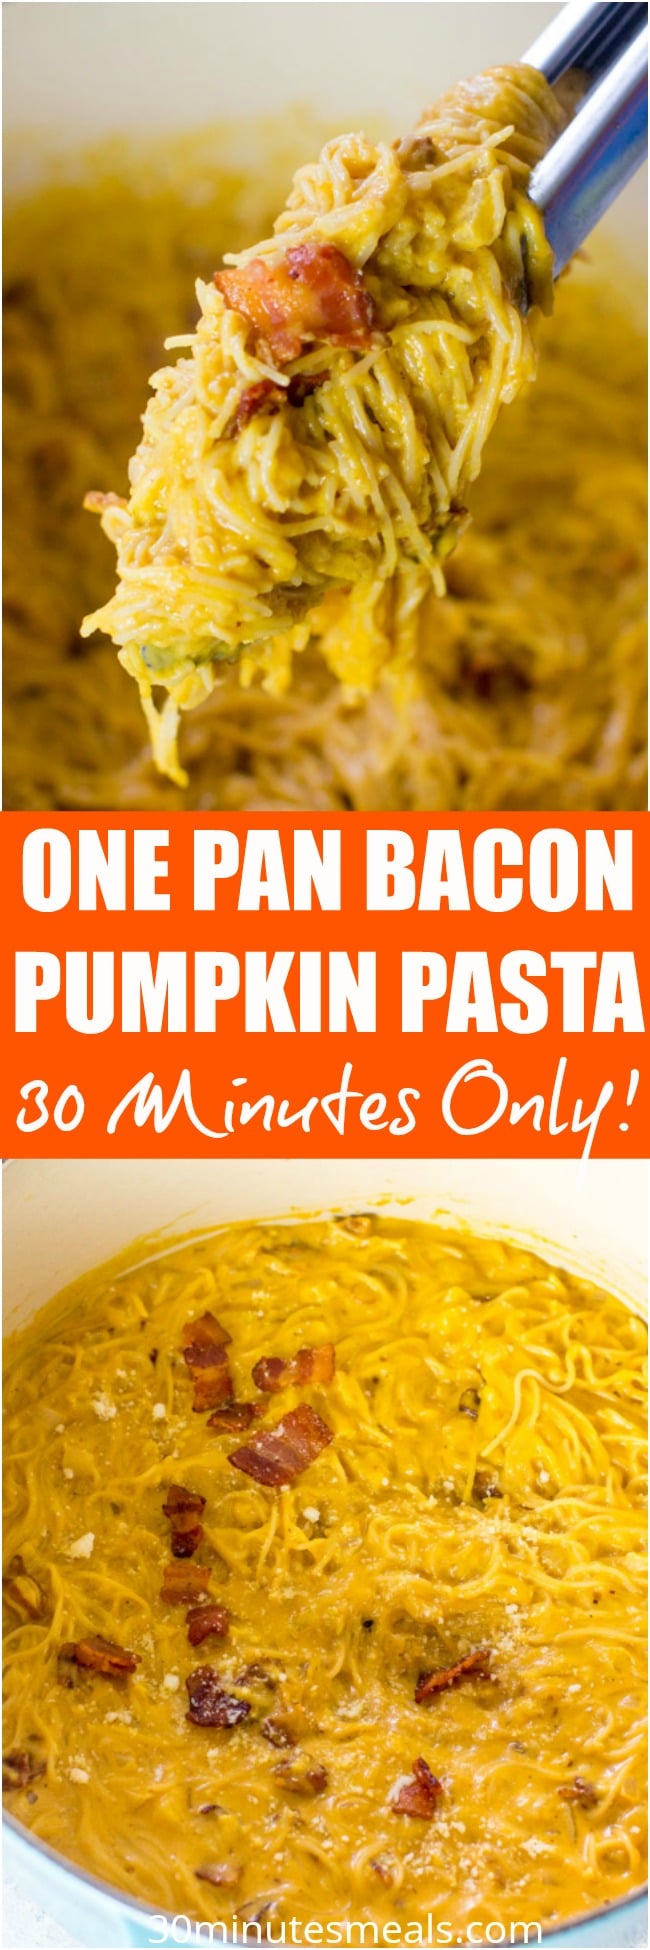 Pumpkin Pasta with bacon is creamy and delicious, easily made in one pot in 30 minutes only.